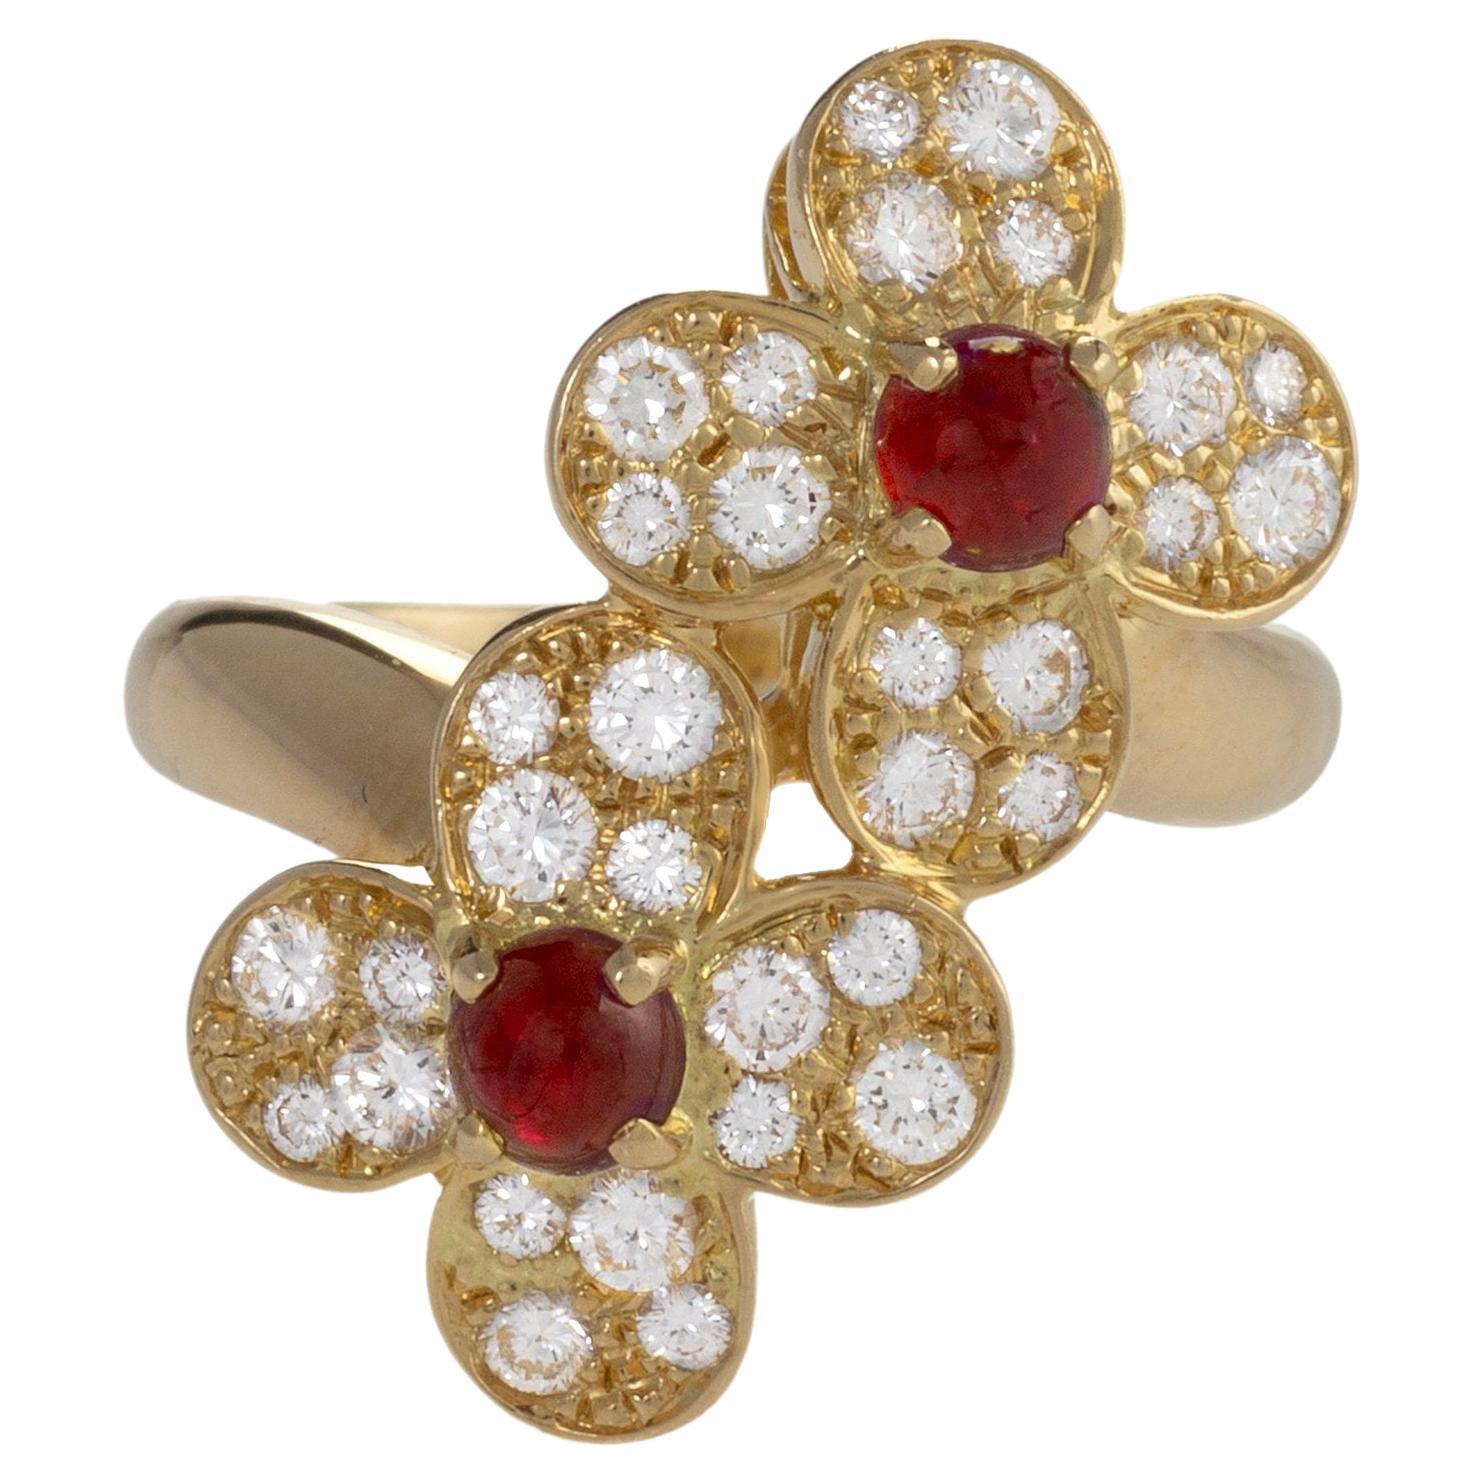 Van Cleef & Arpels Contemporary Ruby and Diamond Trefle Ring im Angebot